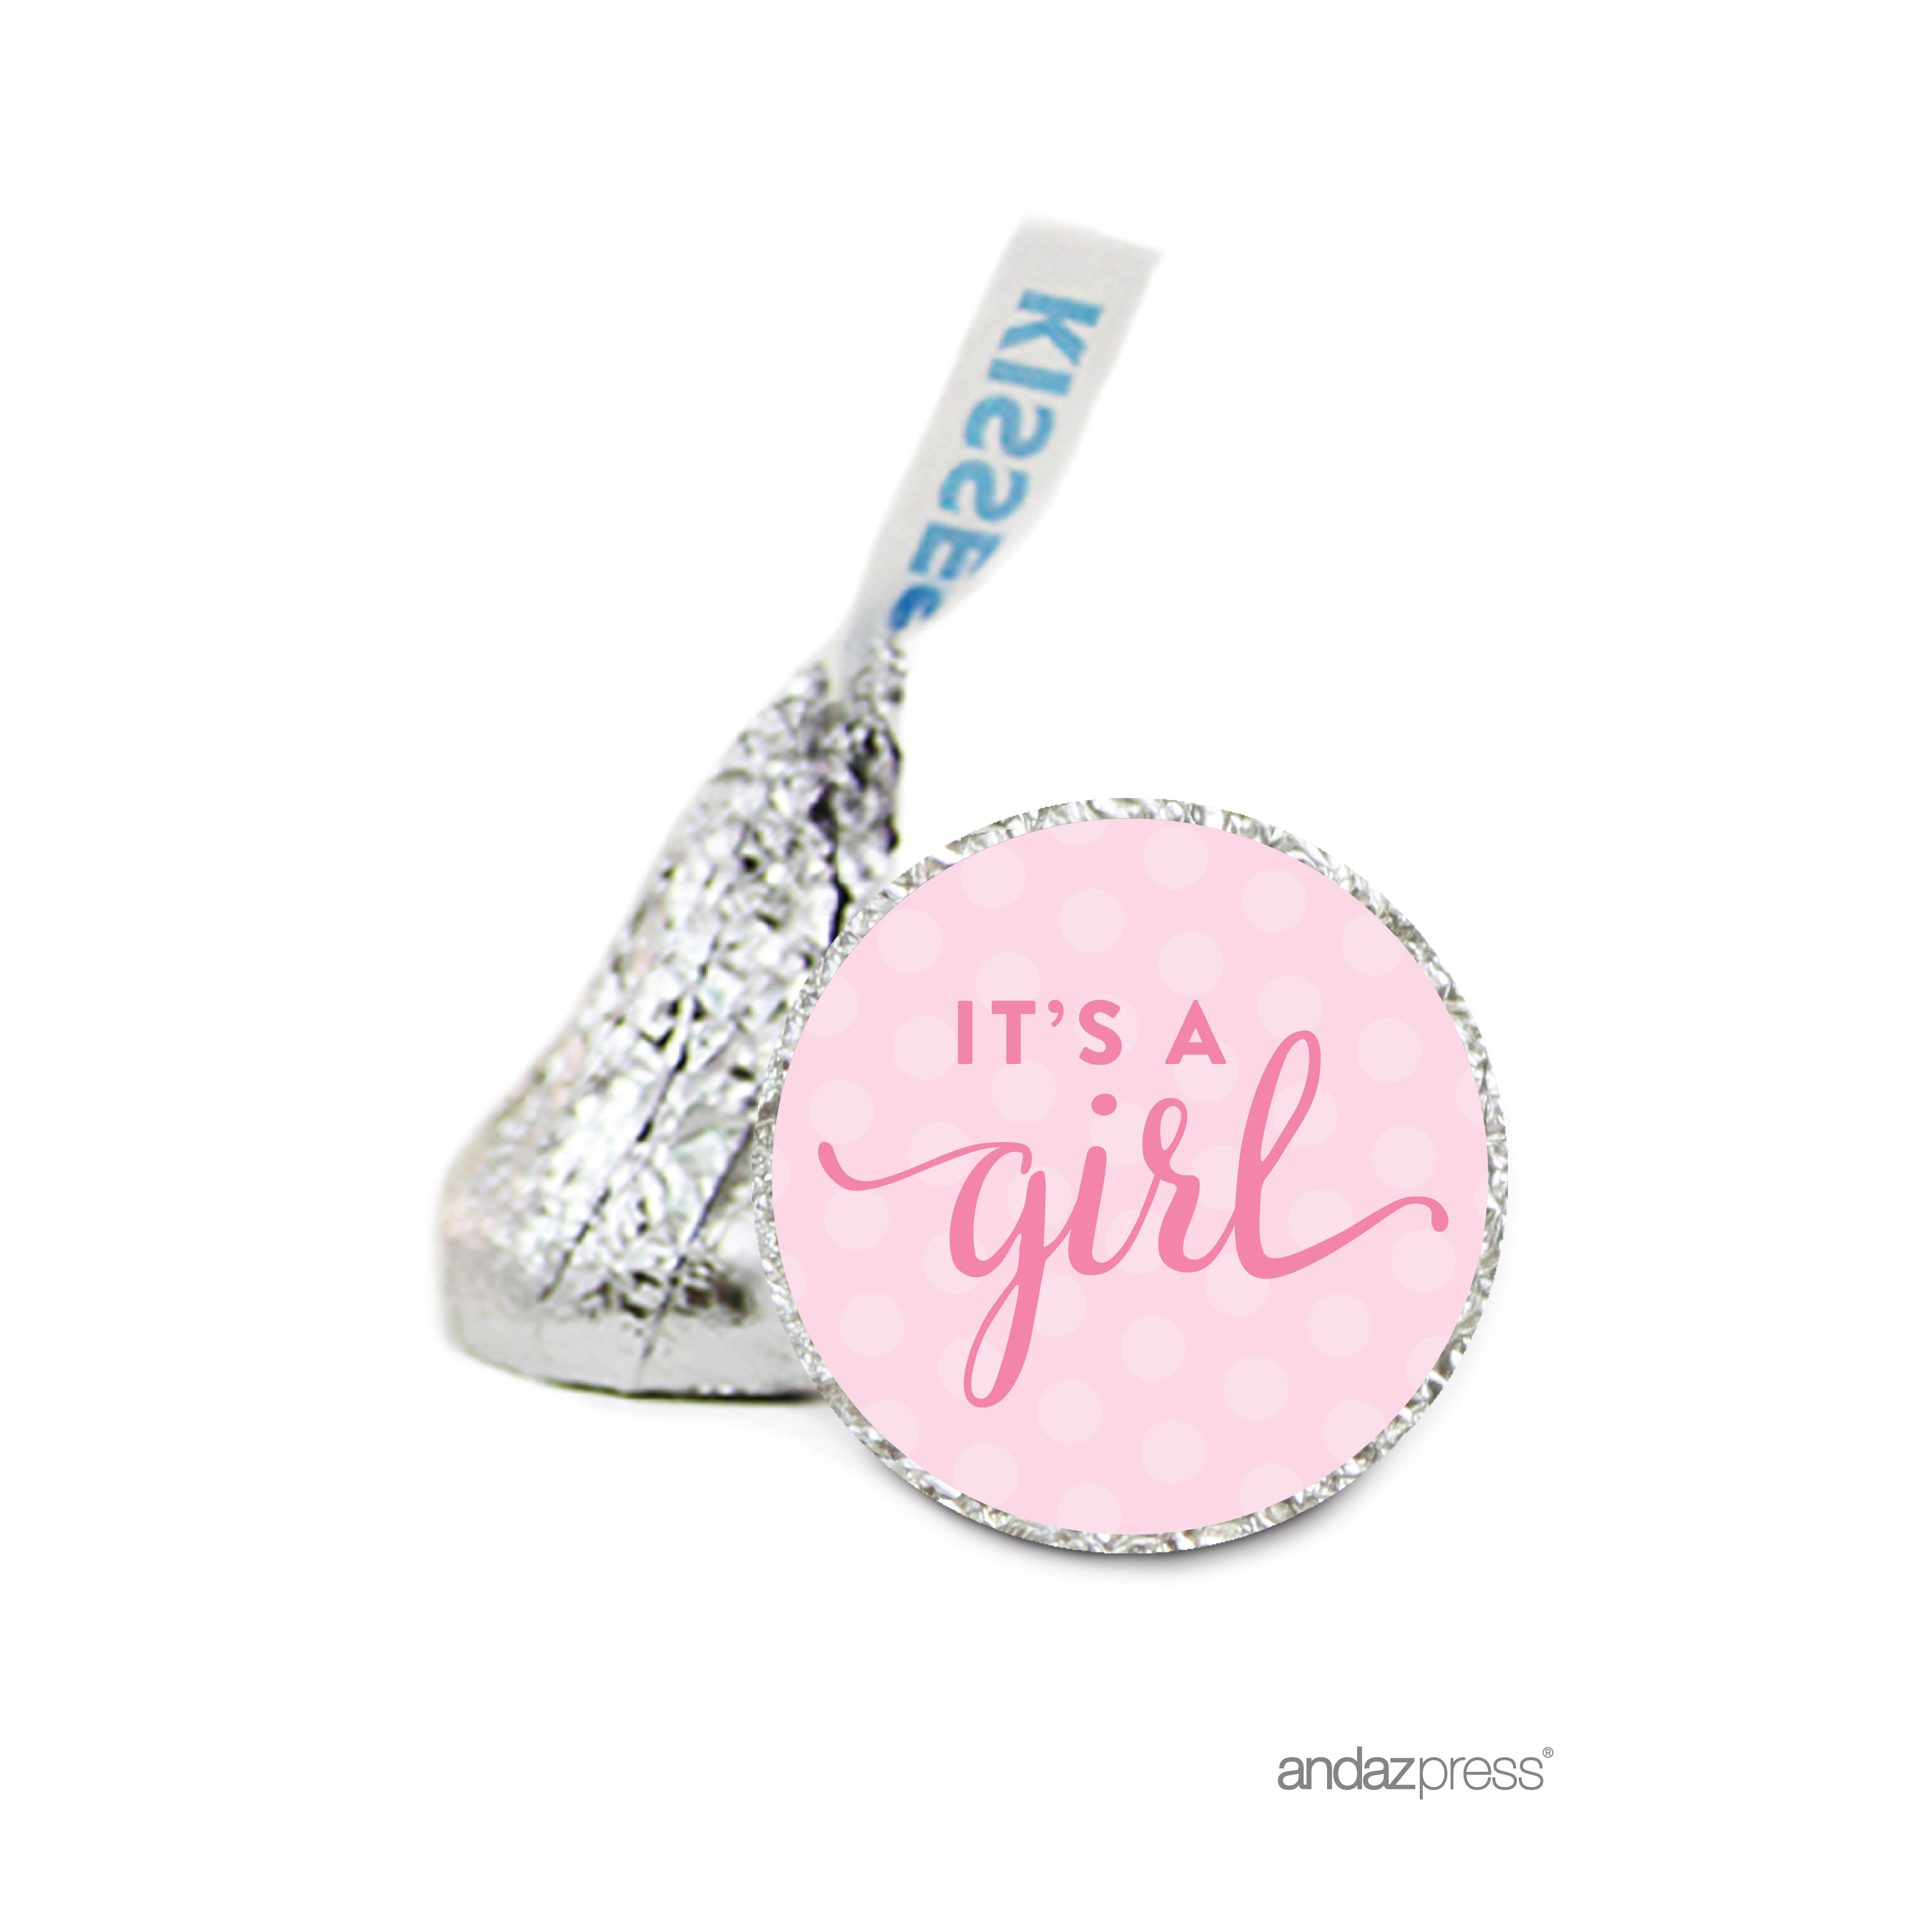 216 IT'S A GIRL BABY SHOWER HERSHEY KISS STICKERS FAVORS PARTY PINK LABELS